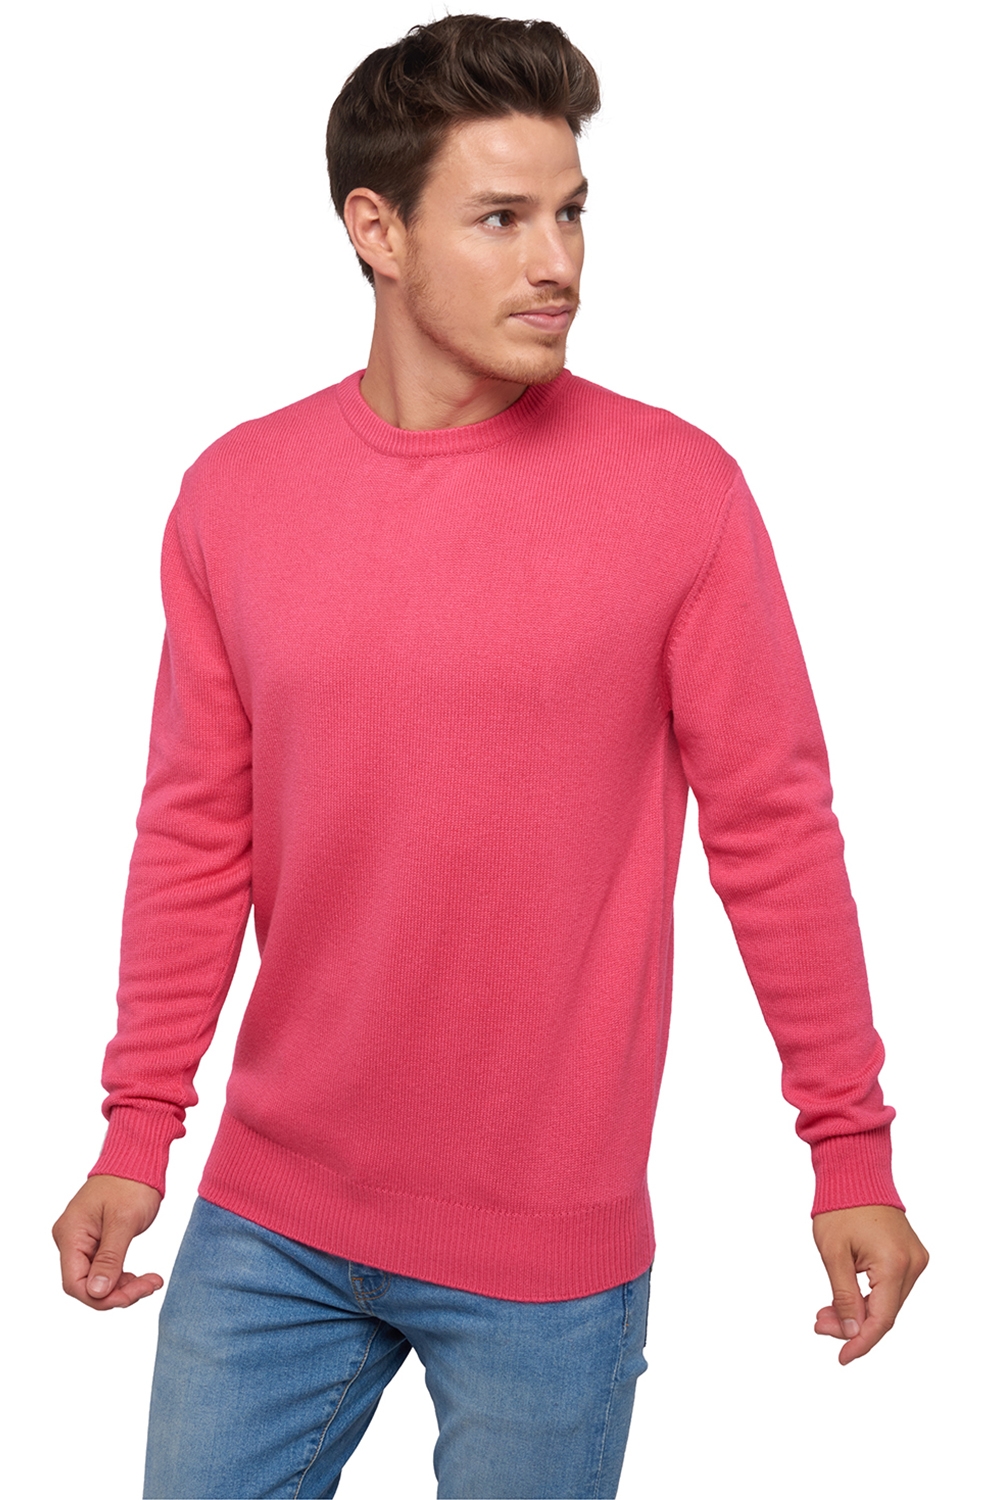 Cachemire pull homme col rond nestor 4f rose shocking 3xl